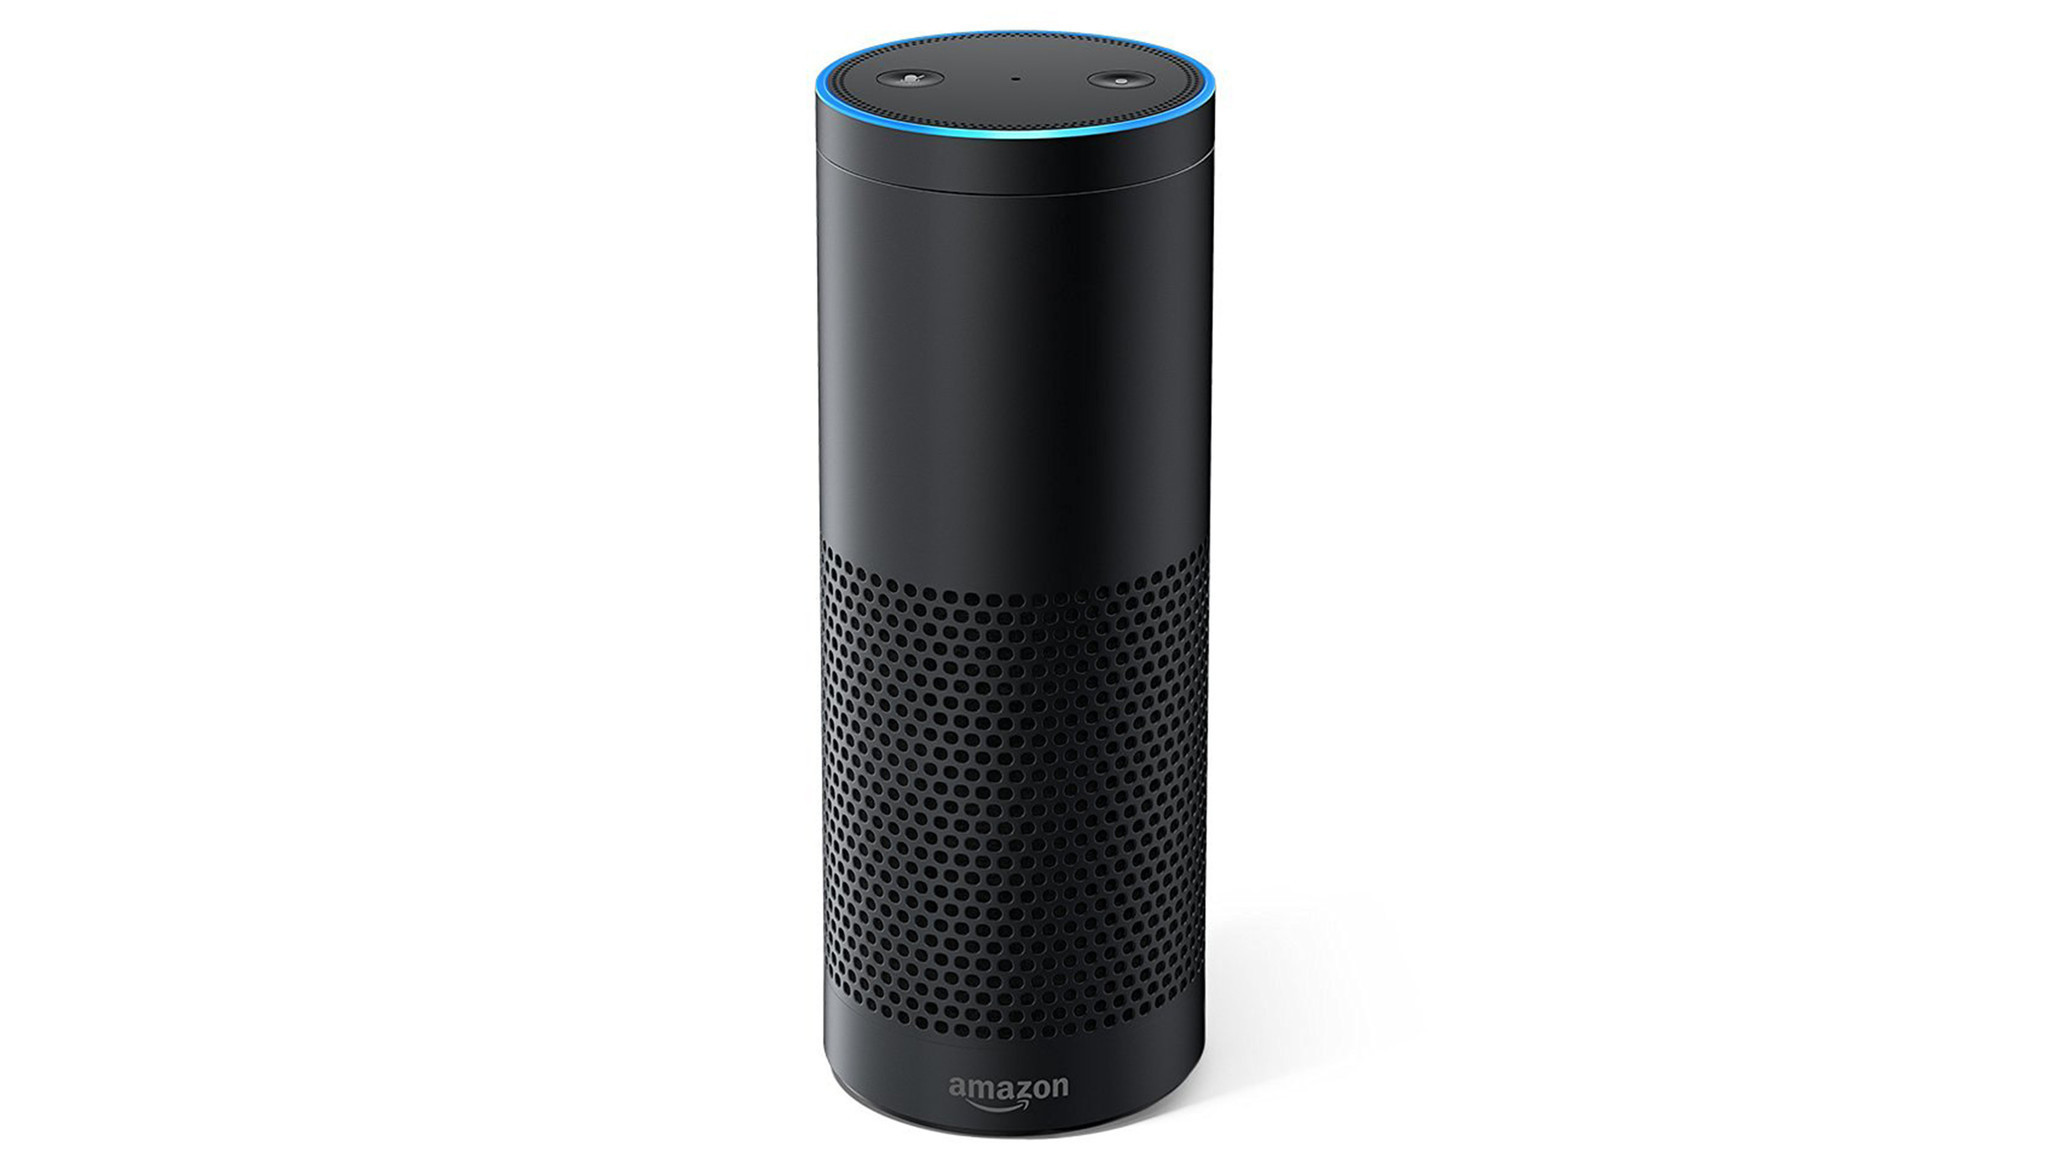 can-alexa-help-solve-a-murder-case-police-think-so-but-amazon-won-t